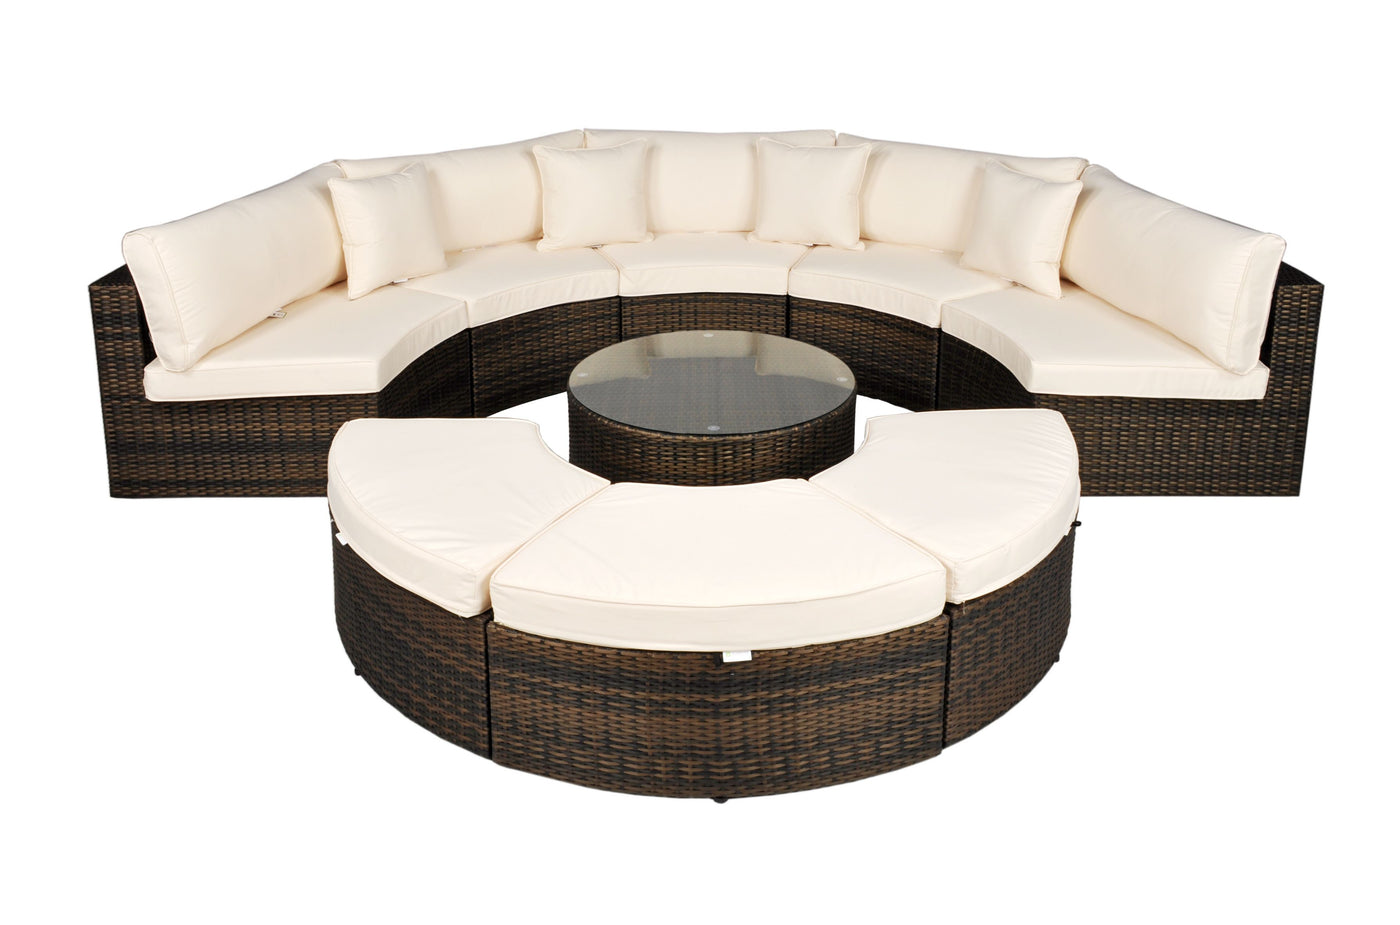 Morocco - Curved Sofa Set with 80cm Round Coffee Table (Dark Brown)